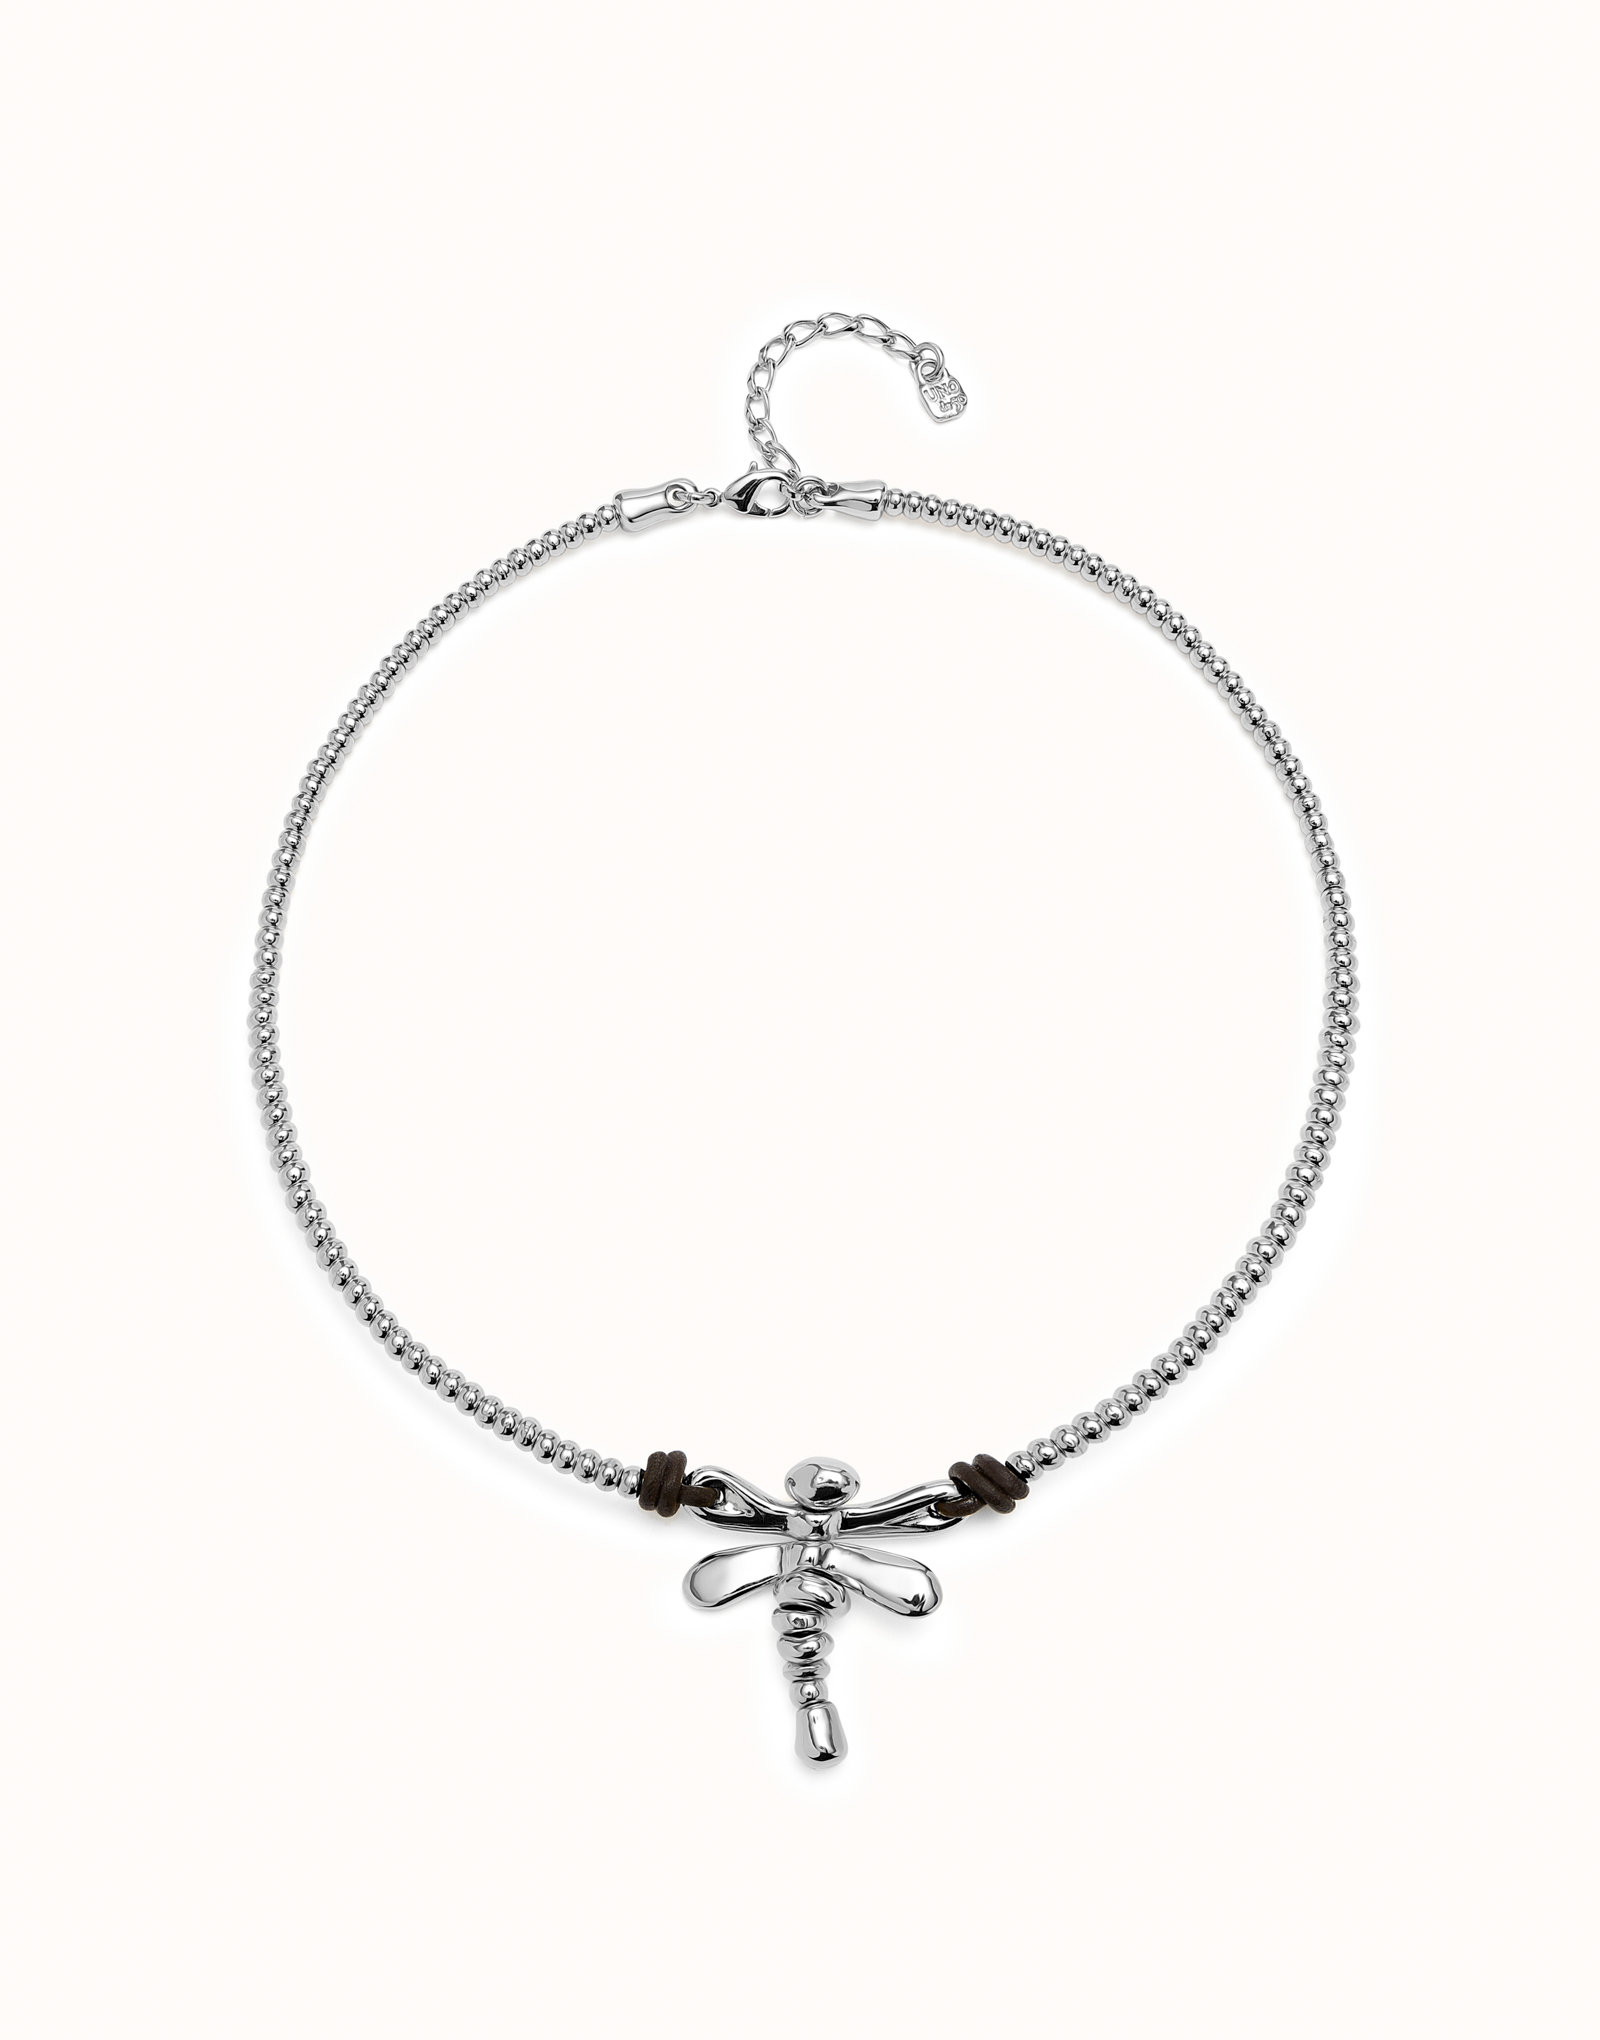 Collana corta placcata argento sterling con libellula centrale, Argent, large image number null